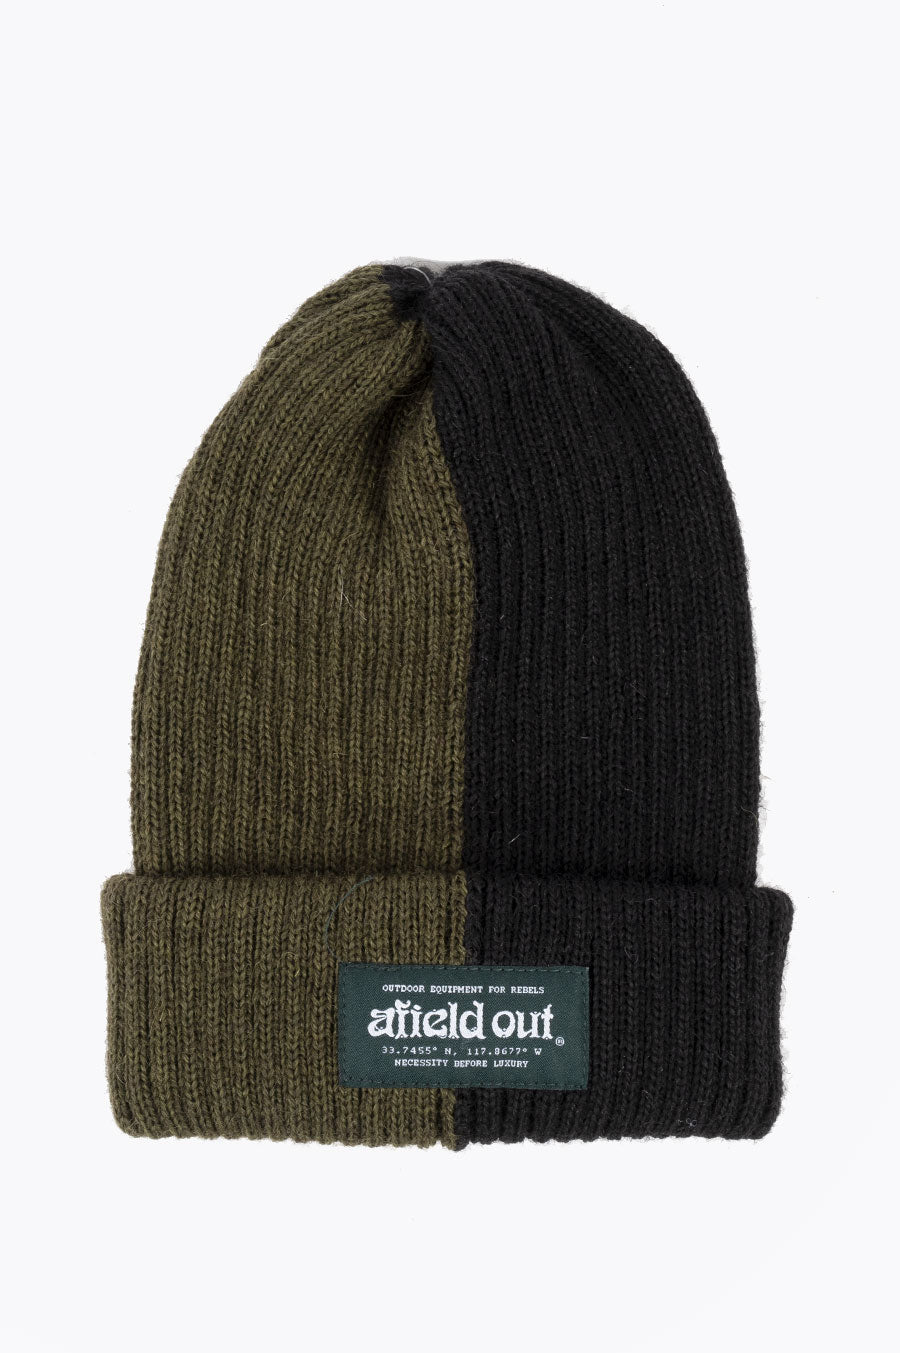 AFIELD OUT TWO TONE WATCH CAP SAGE BLACK